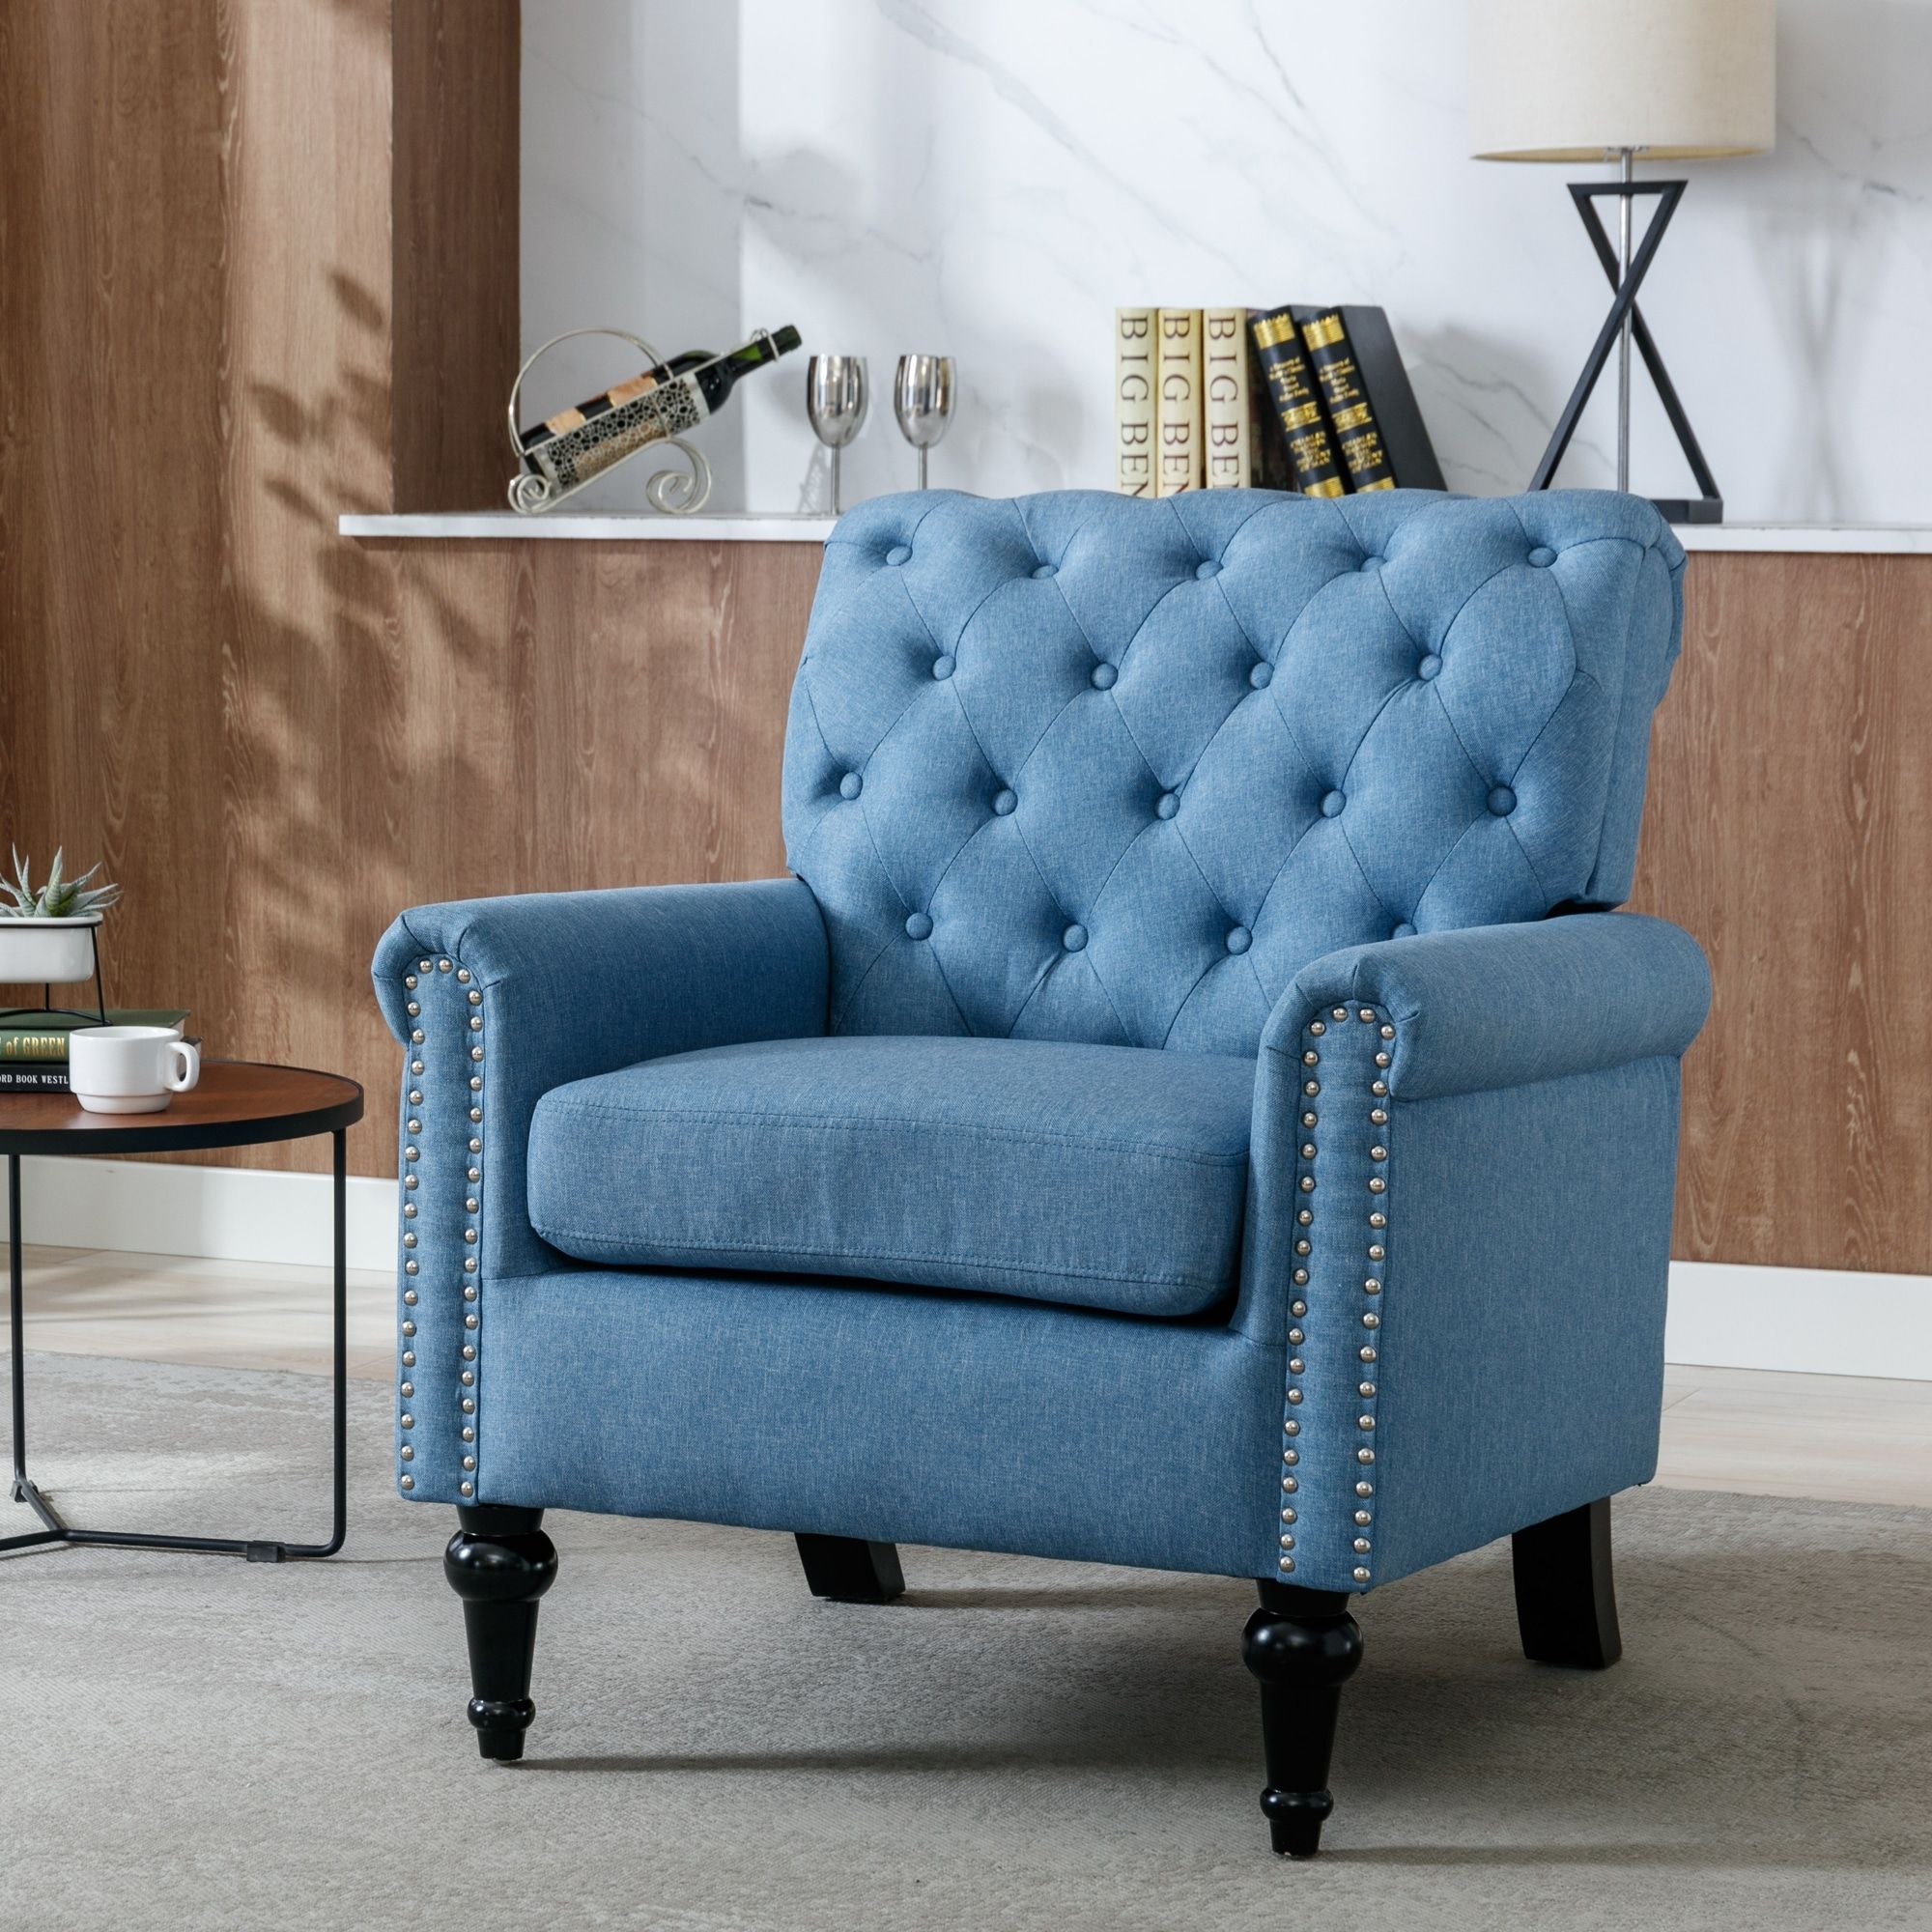 Tufted Upholstered Accent Chairs Single Sofa Chair For Livingroom With  Linen Fabric Armchairs Comfy Reading Chair – Bed Bath & Beyond – 38047189 Inside Comfy Reading Armchairs (View 5 of 15)